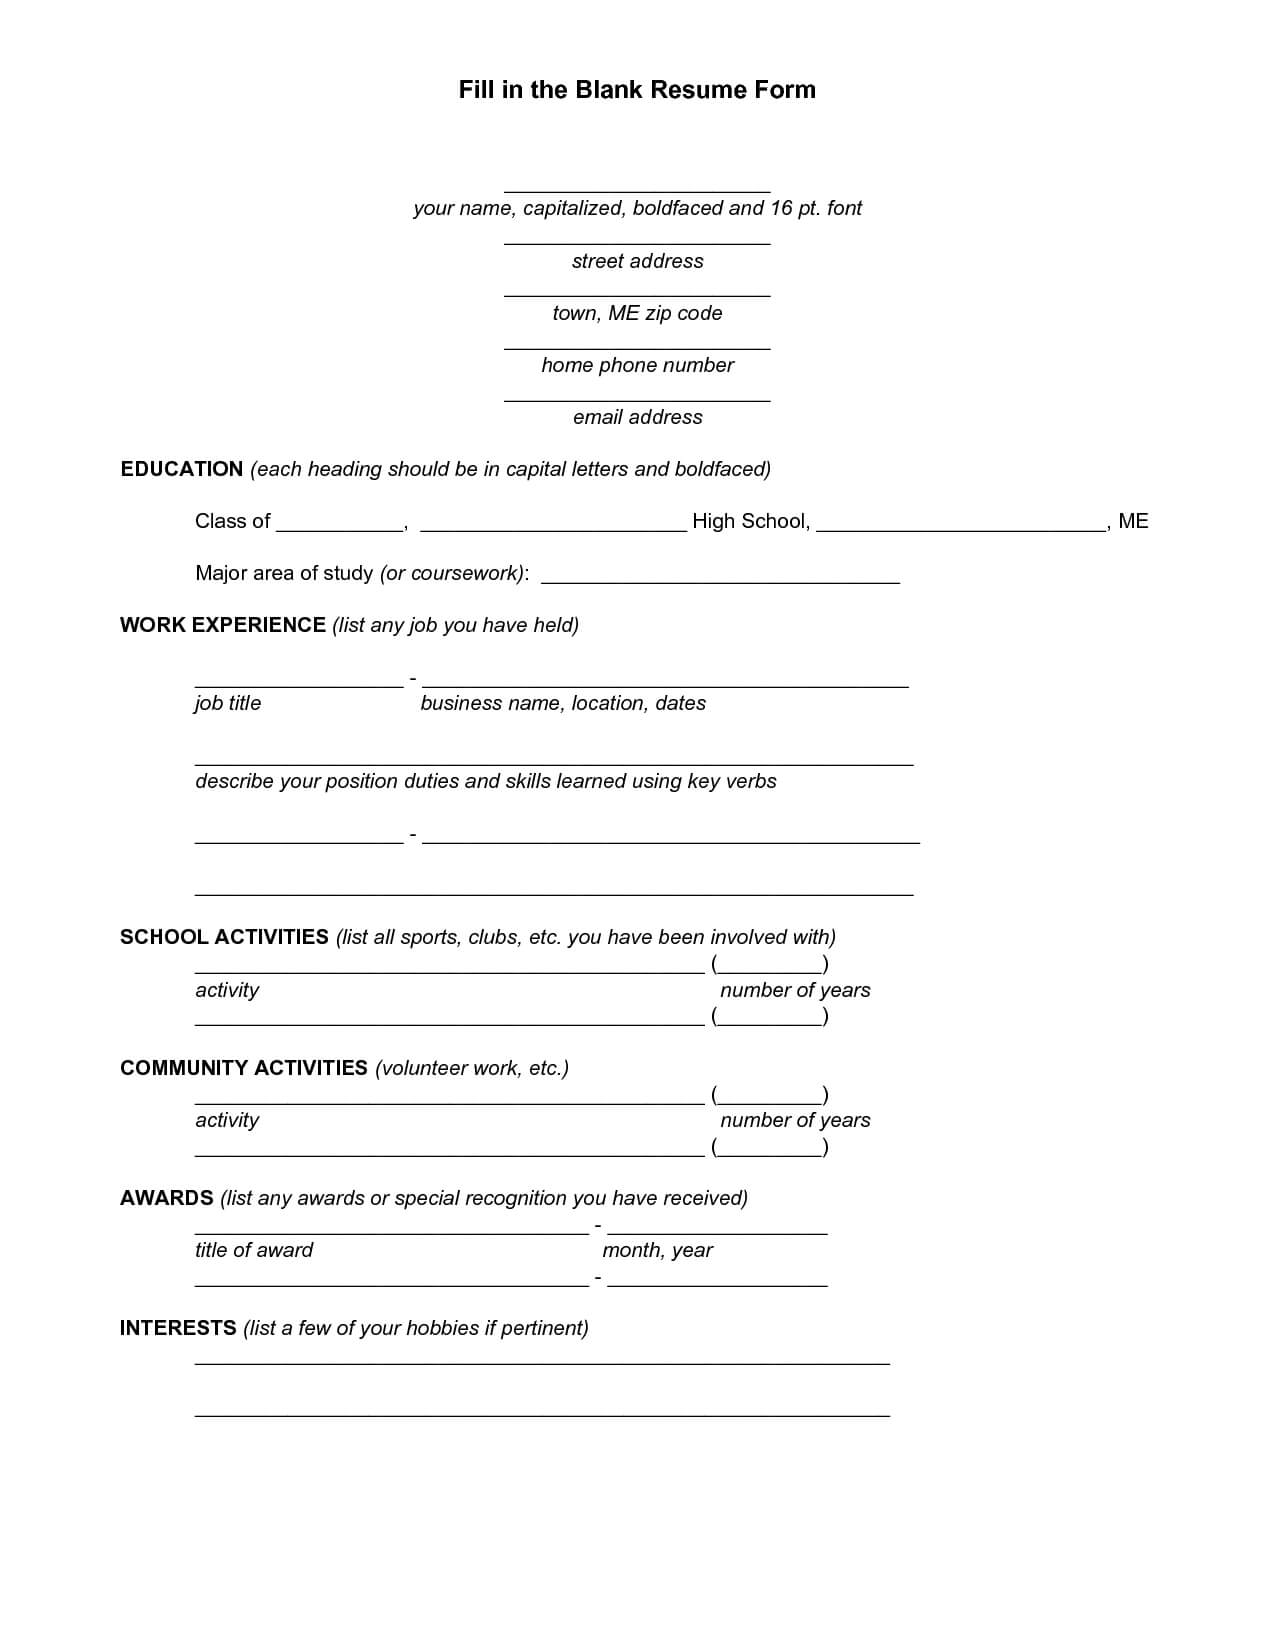 You Can Fill In | Student Resume, Resume Form, Job Resume Regarding Free Blank Cv Template Download